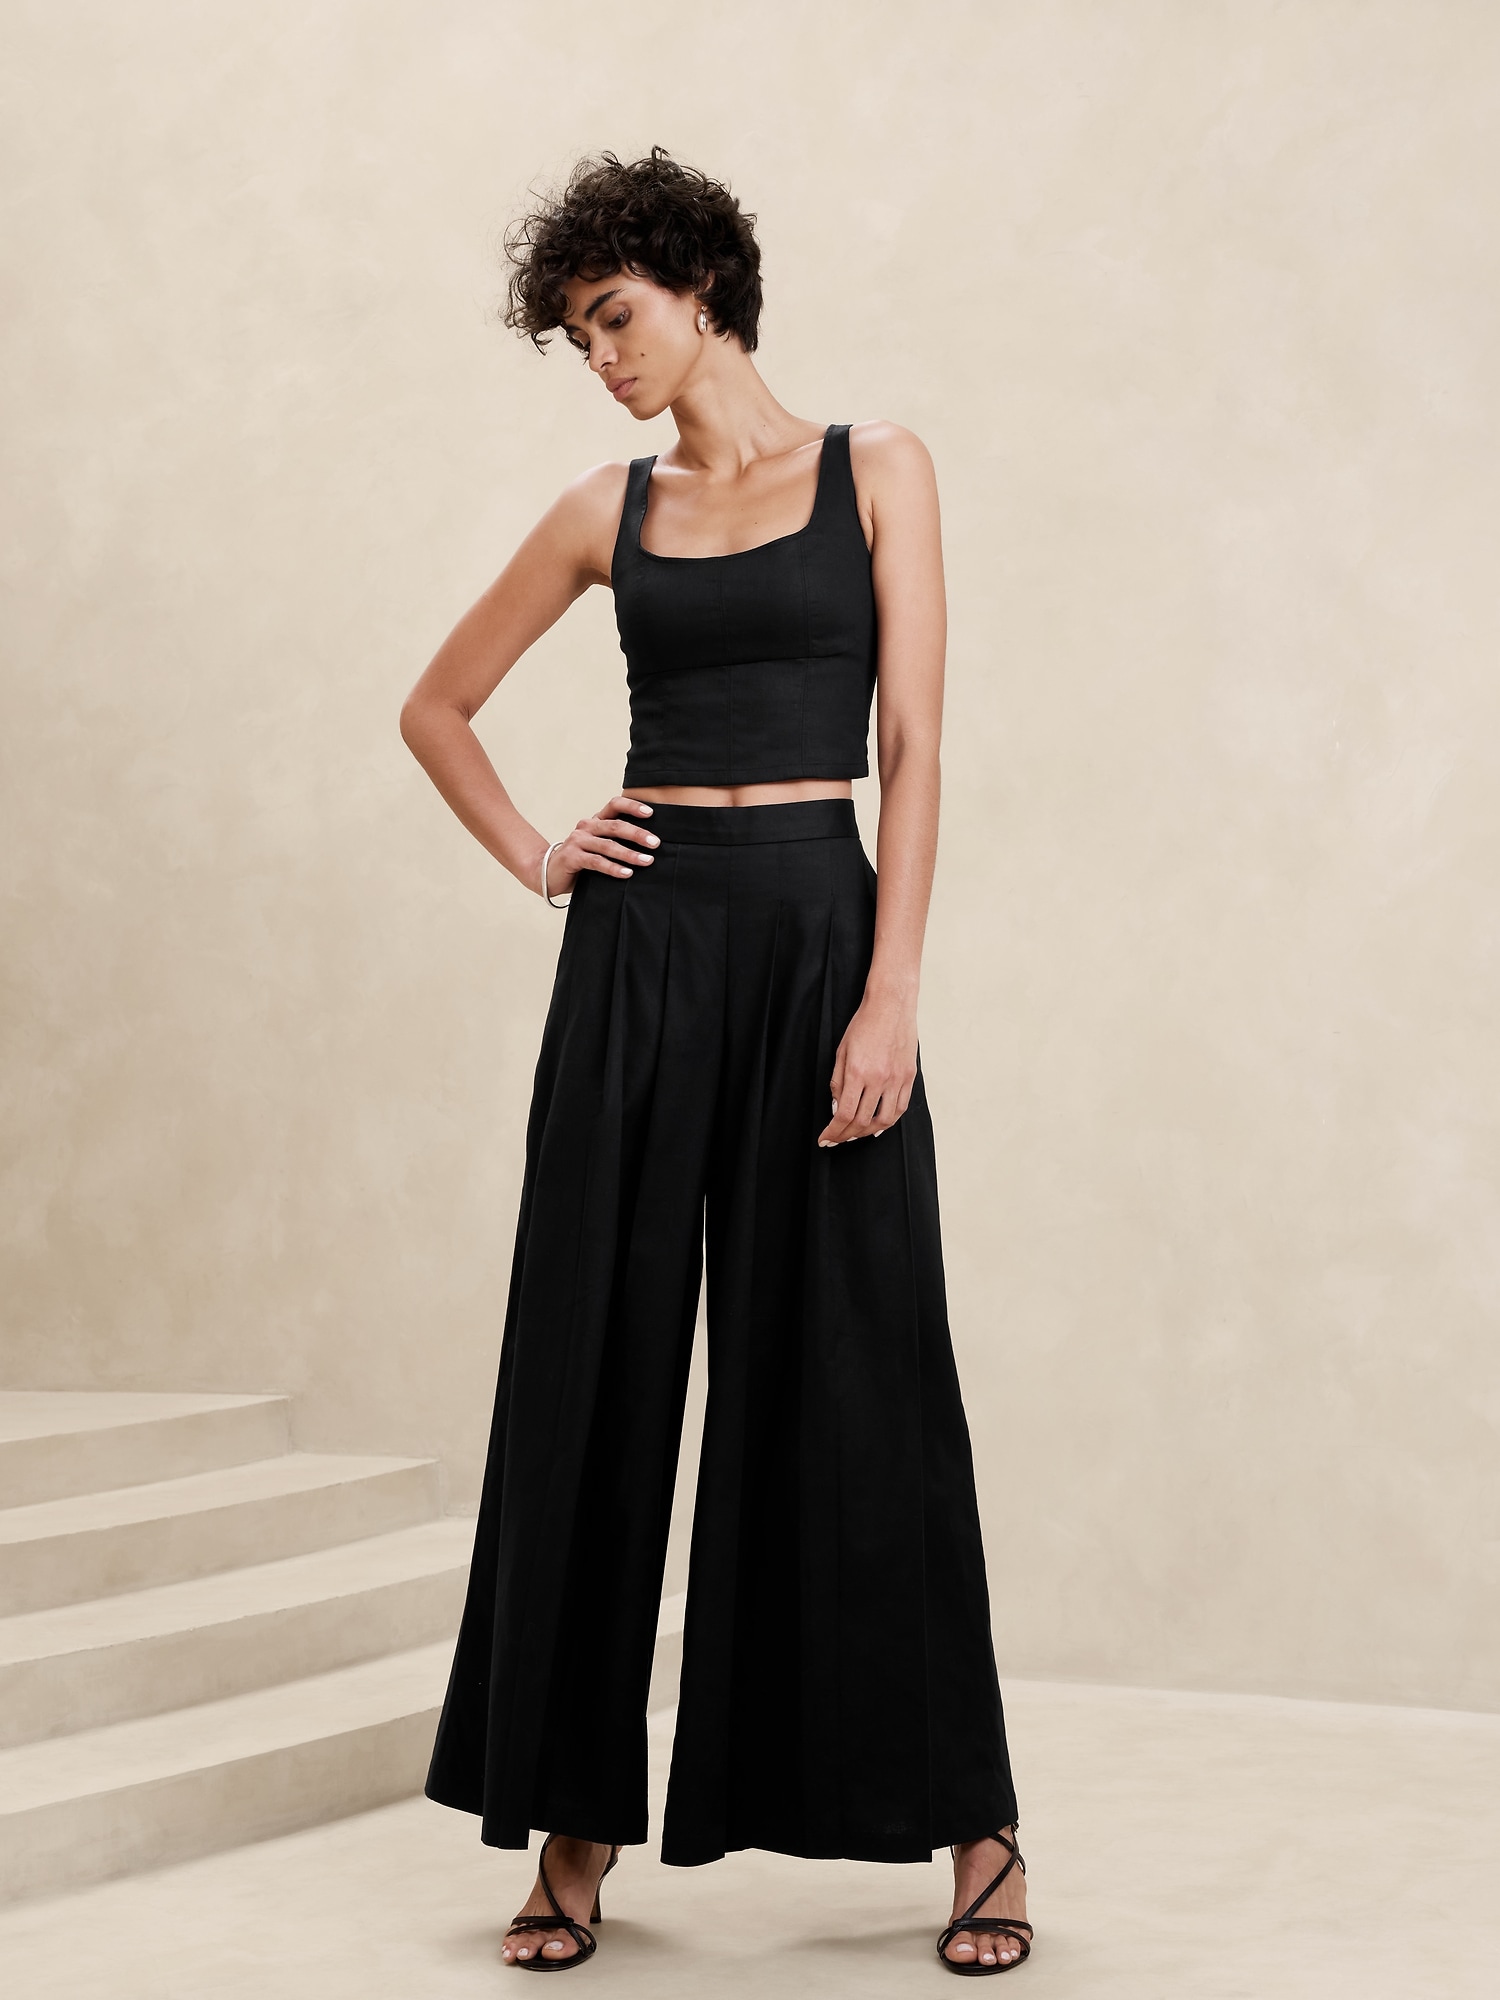 Buy Women's Cotton Linen Pants, Solid Color Elastic Waist Drawstring  Cropped Wide Leg Pants Loose Trousers Pants with Pockets at